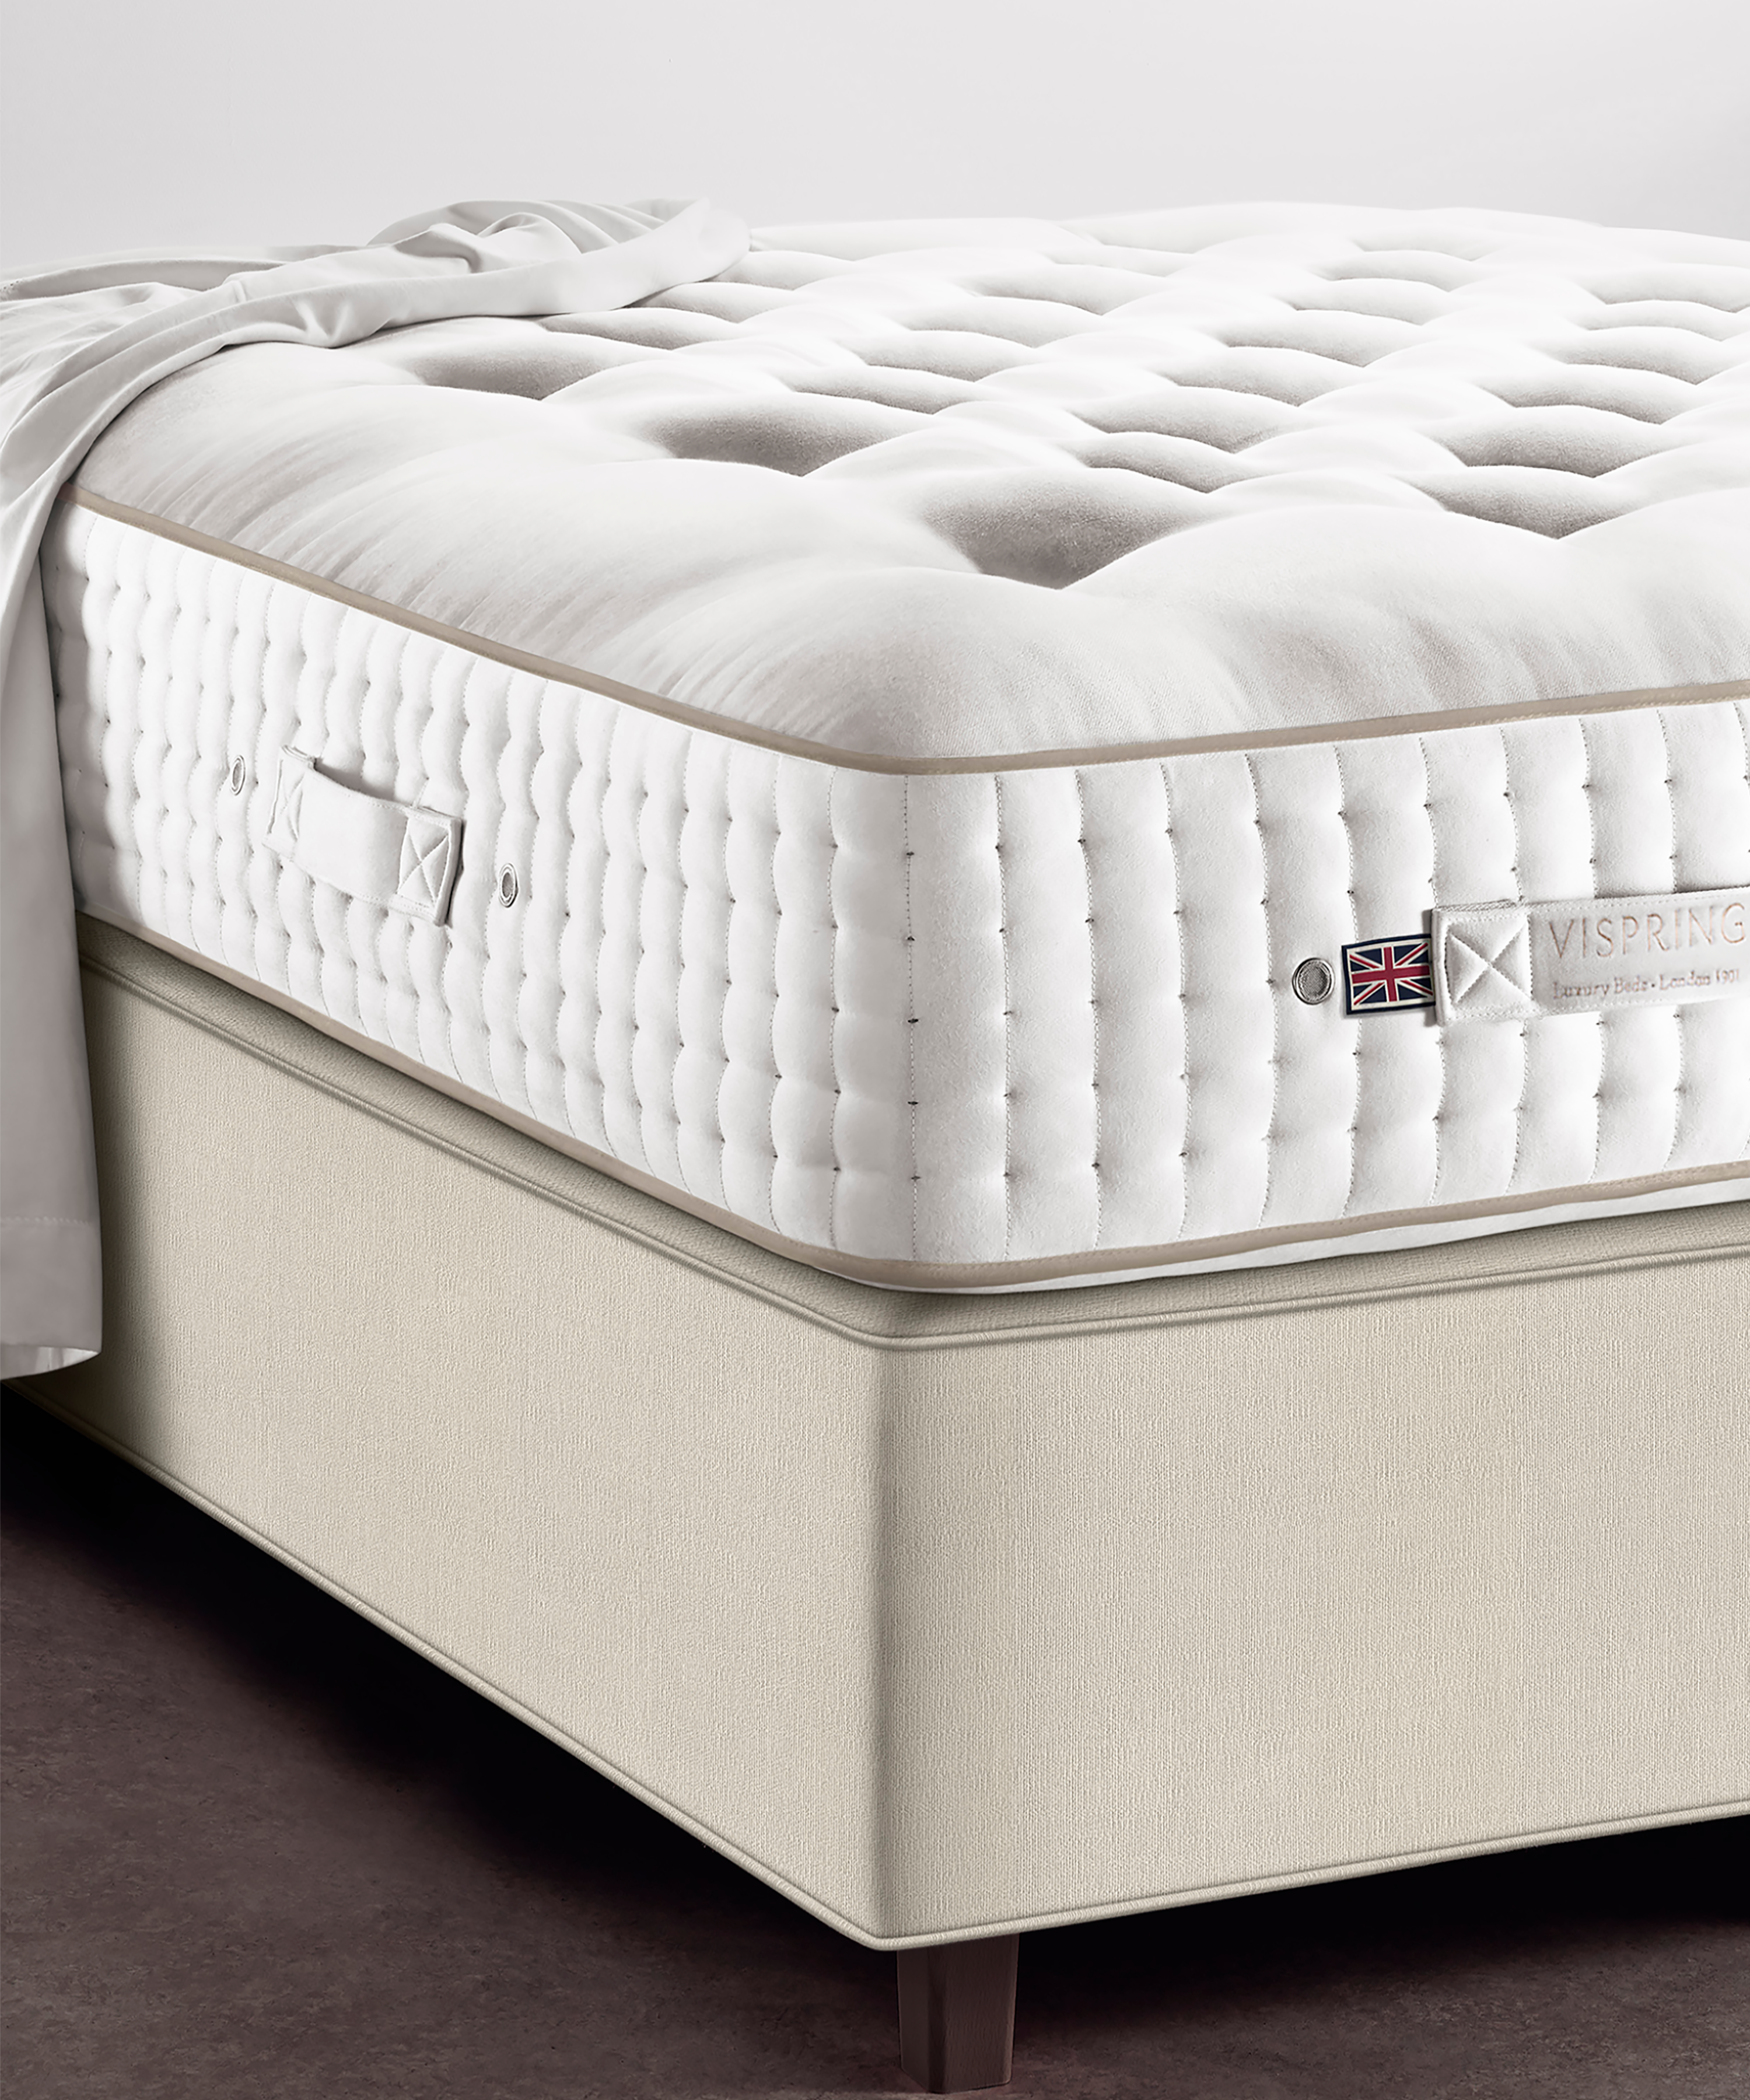 The Masterpiece Superb is among Vispring's top two finest mattresses and is sure to create an exceptionally luxurious and healthy sleeping environment for you to wake up from each morning.